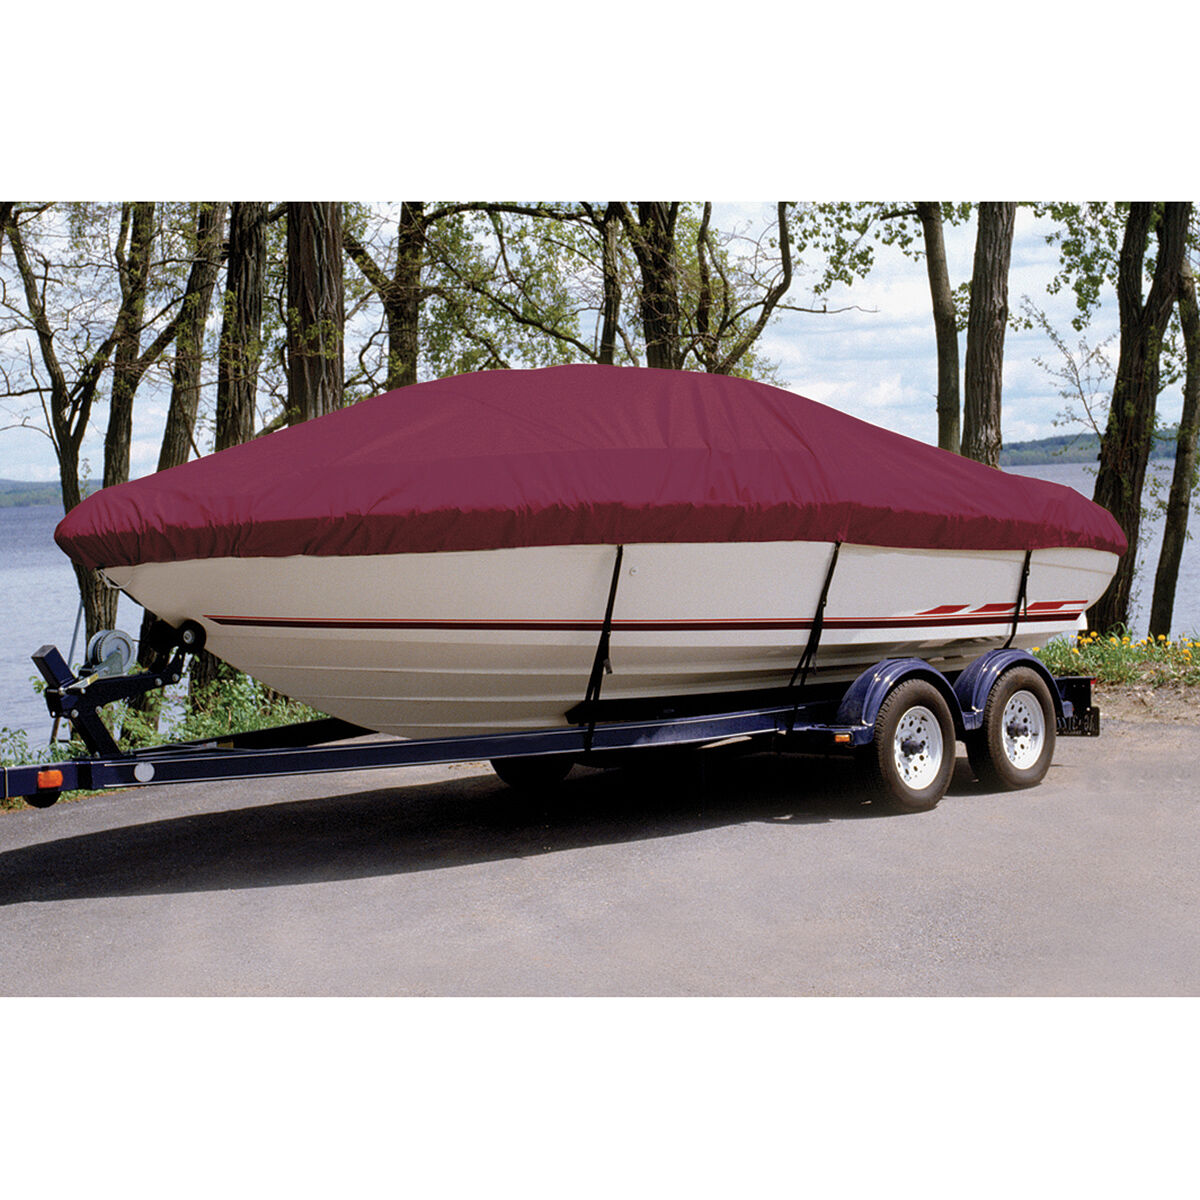 Taylor Trailerite Ultima Cover for 09-12 Lund 1625 Rebel XL SS PTM O/B in Cranberry